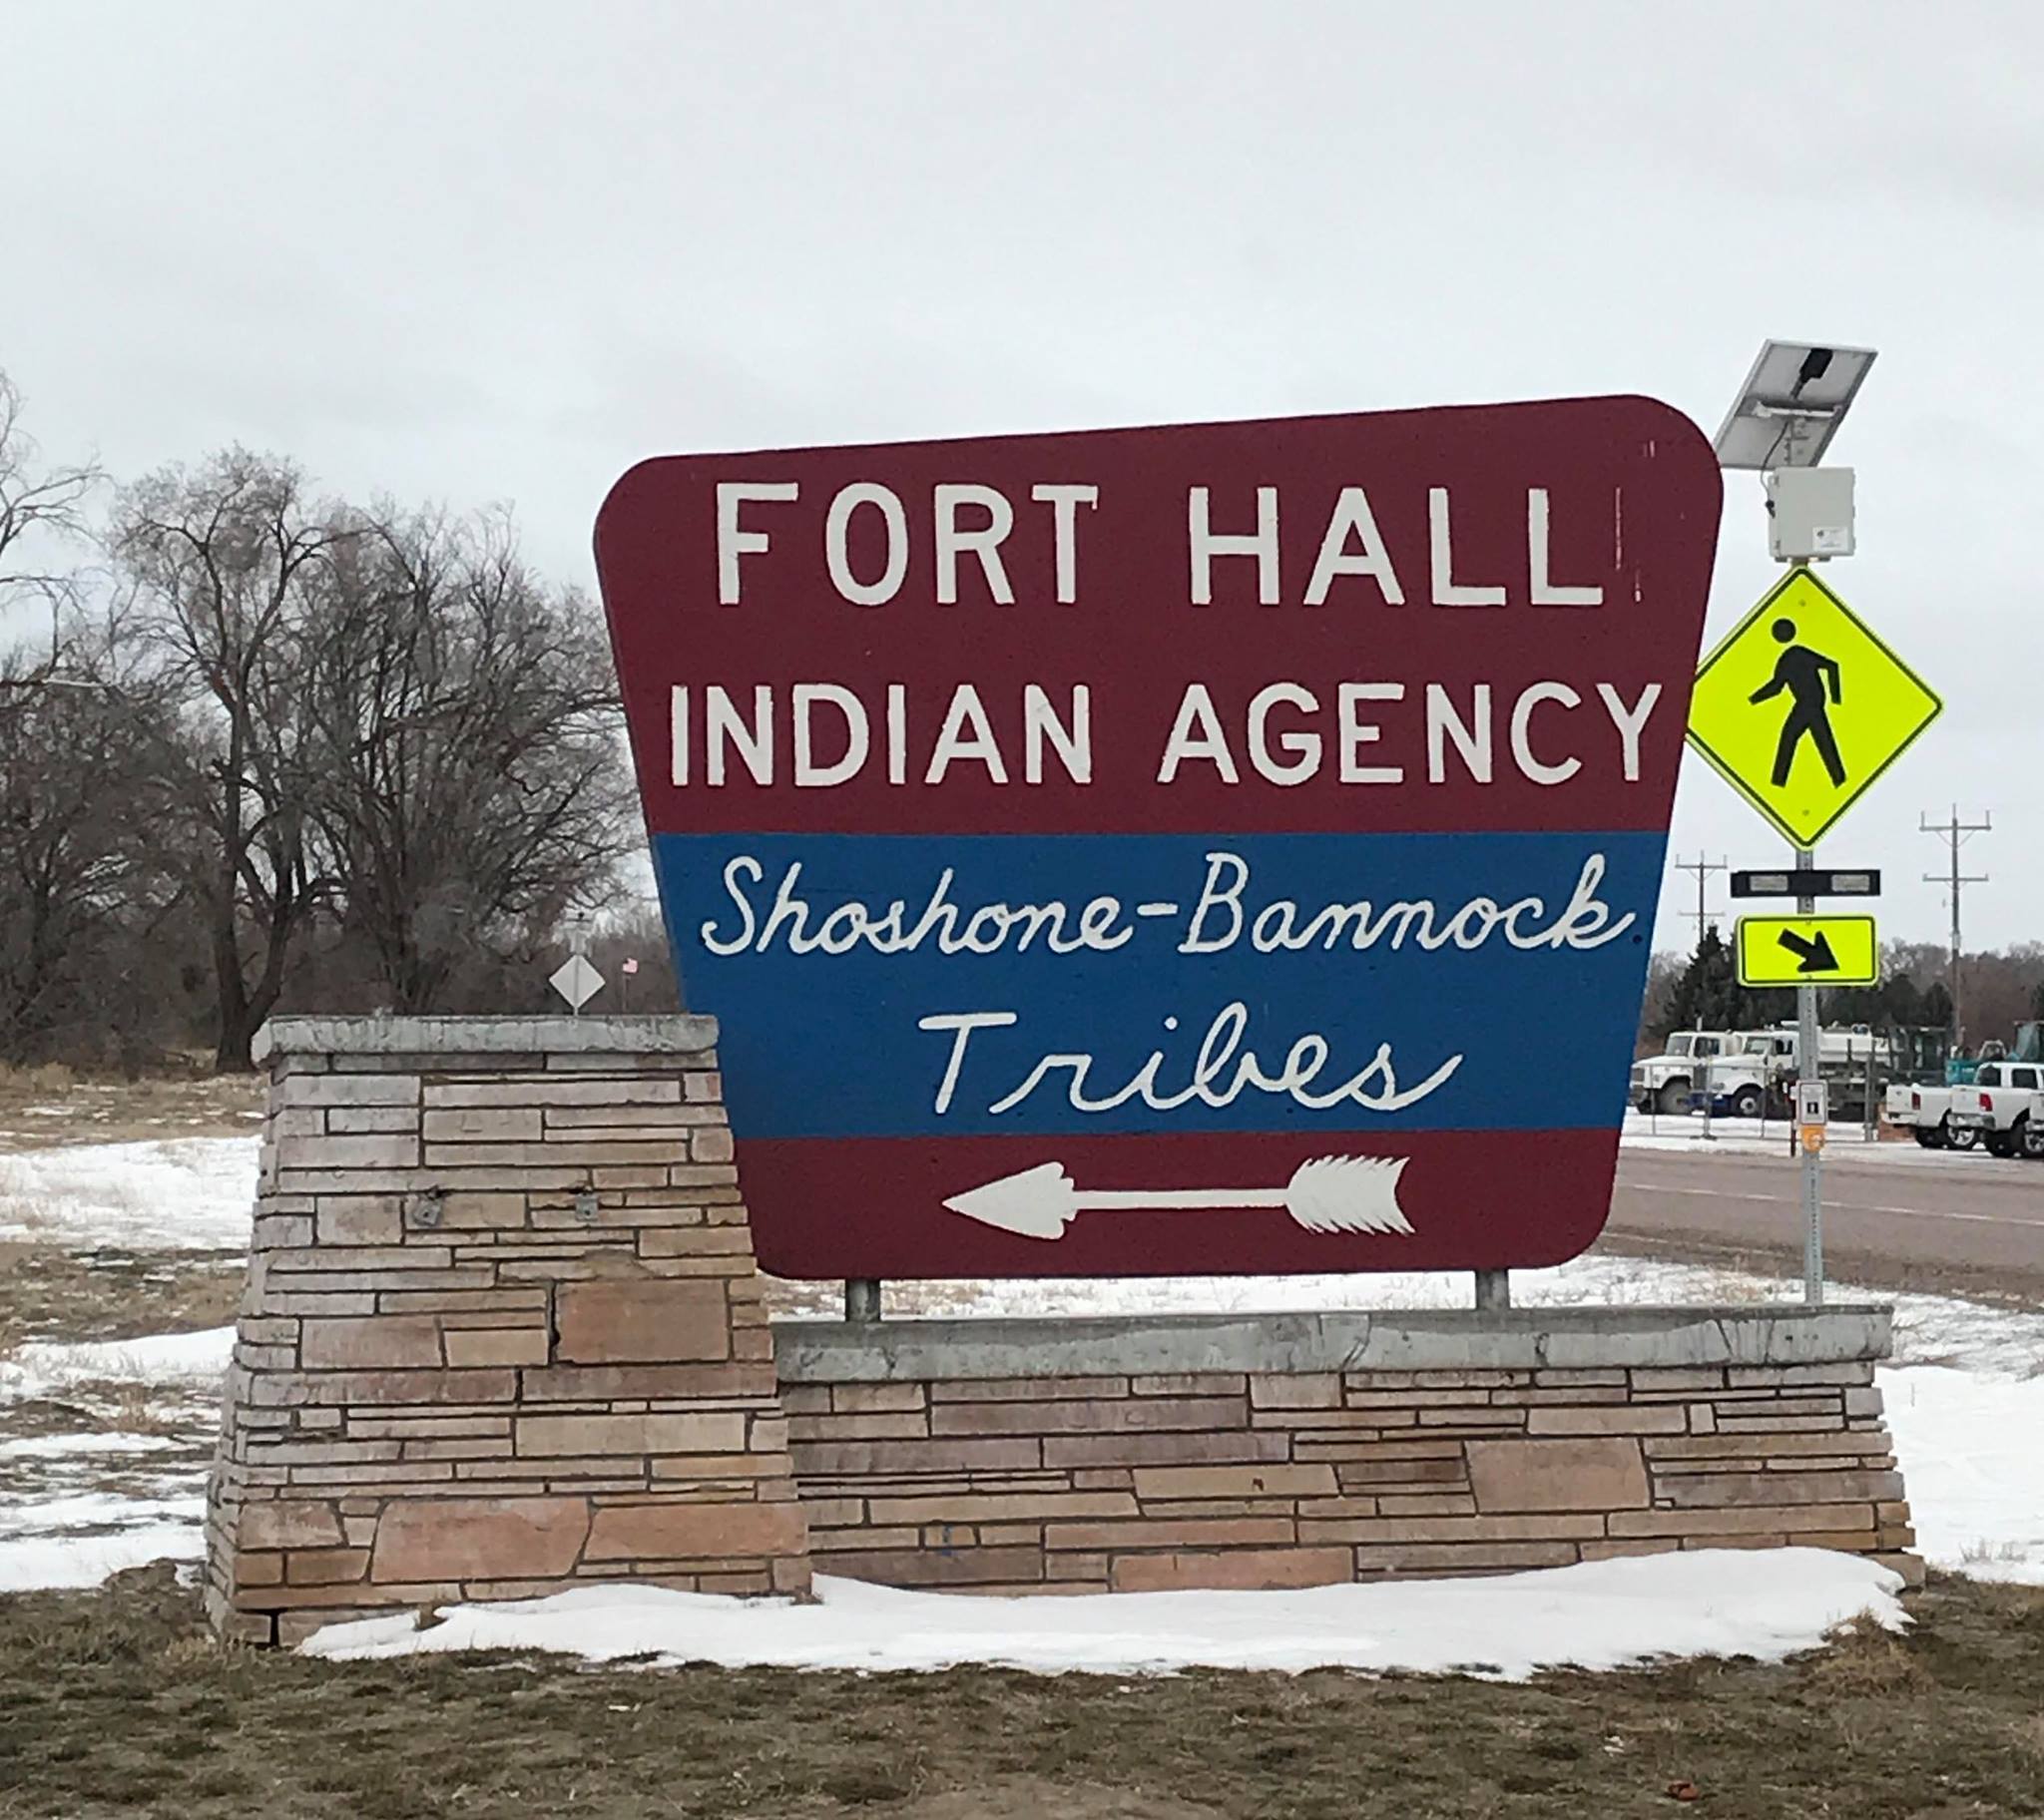 Shoshone-Bannock Tribes face rumors of casino following land purchase